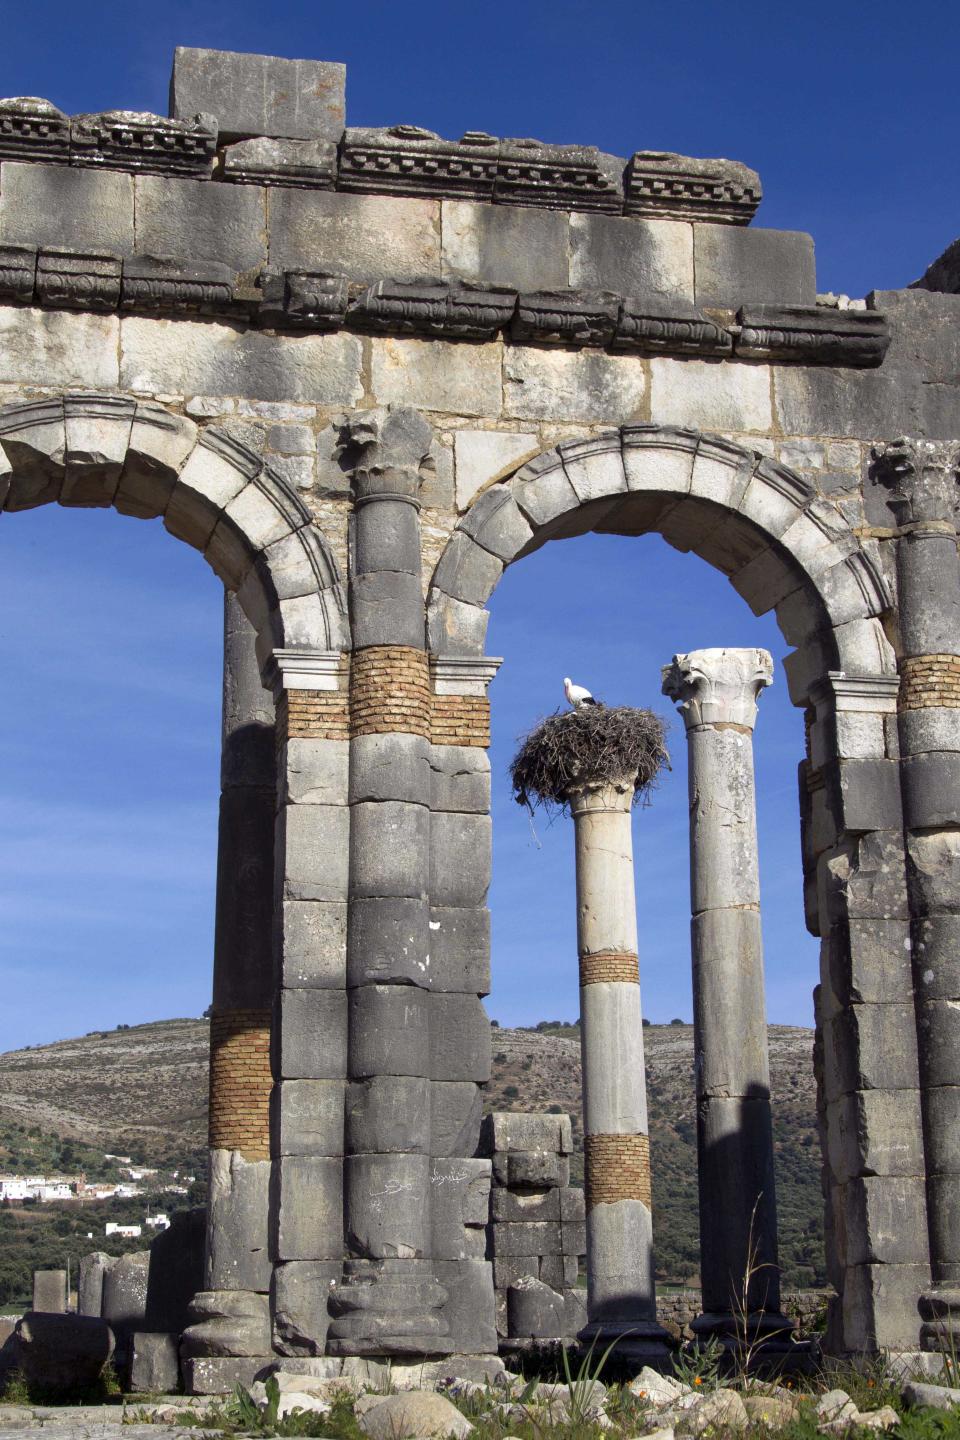 In this Thursday, March 8, 2012 photo, a stork nests on top of a pillar seen through the arches of the Basilica, the main administrative building of Volubilis, Morocco's premier Roman ruin near Meknes, Morocco. (AP Photo/Abdeljalil Bounhar)